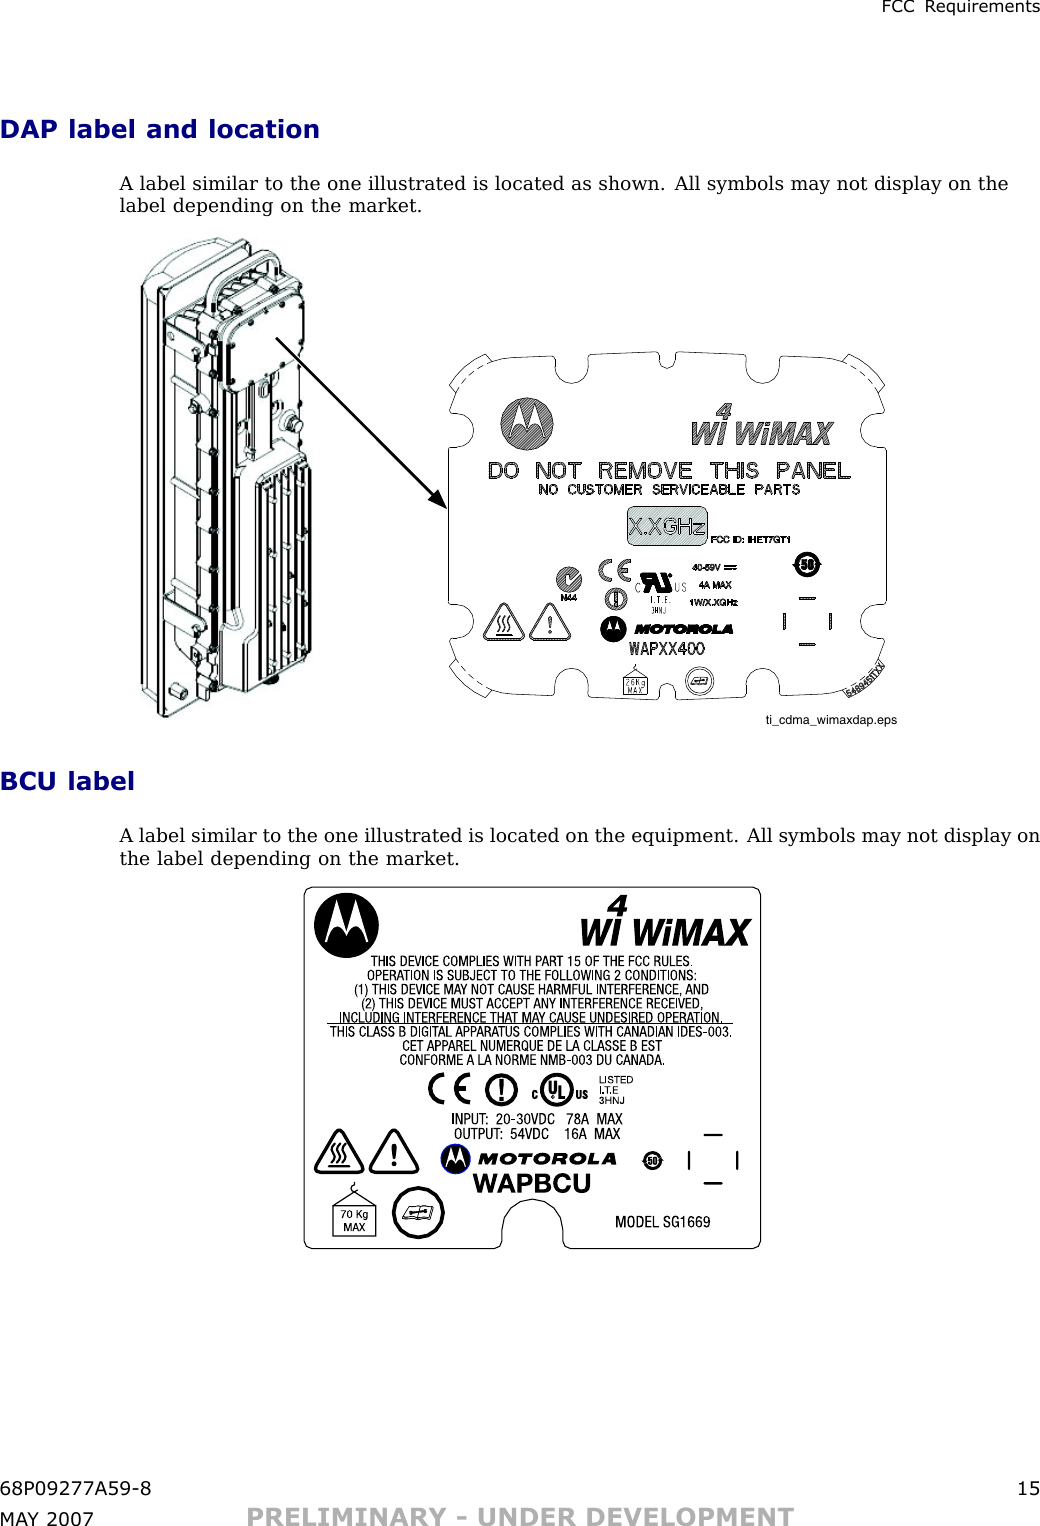 FCC R equirementsDAP label and locationA label similar to the one illustrated is located as shown. All symbols may not display on thelabel depending on the market.ti_cdma_wimaxdap.epsBCU labelA label similar to the one illustrated is located on the equipment. All symbols may not display onthe label depending on the market.68P09277A59 -8 15MA Y 2007 PRELIMINARY - UNDER DEVELOPMENT